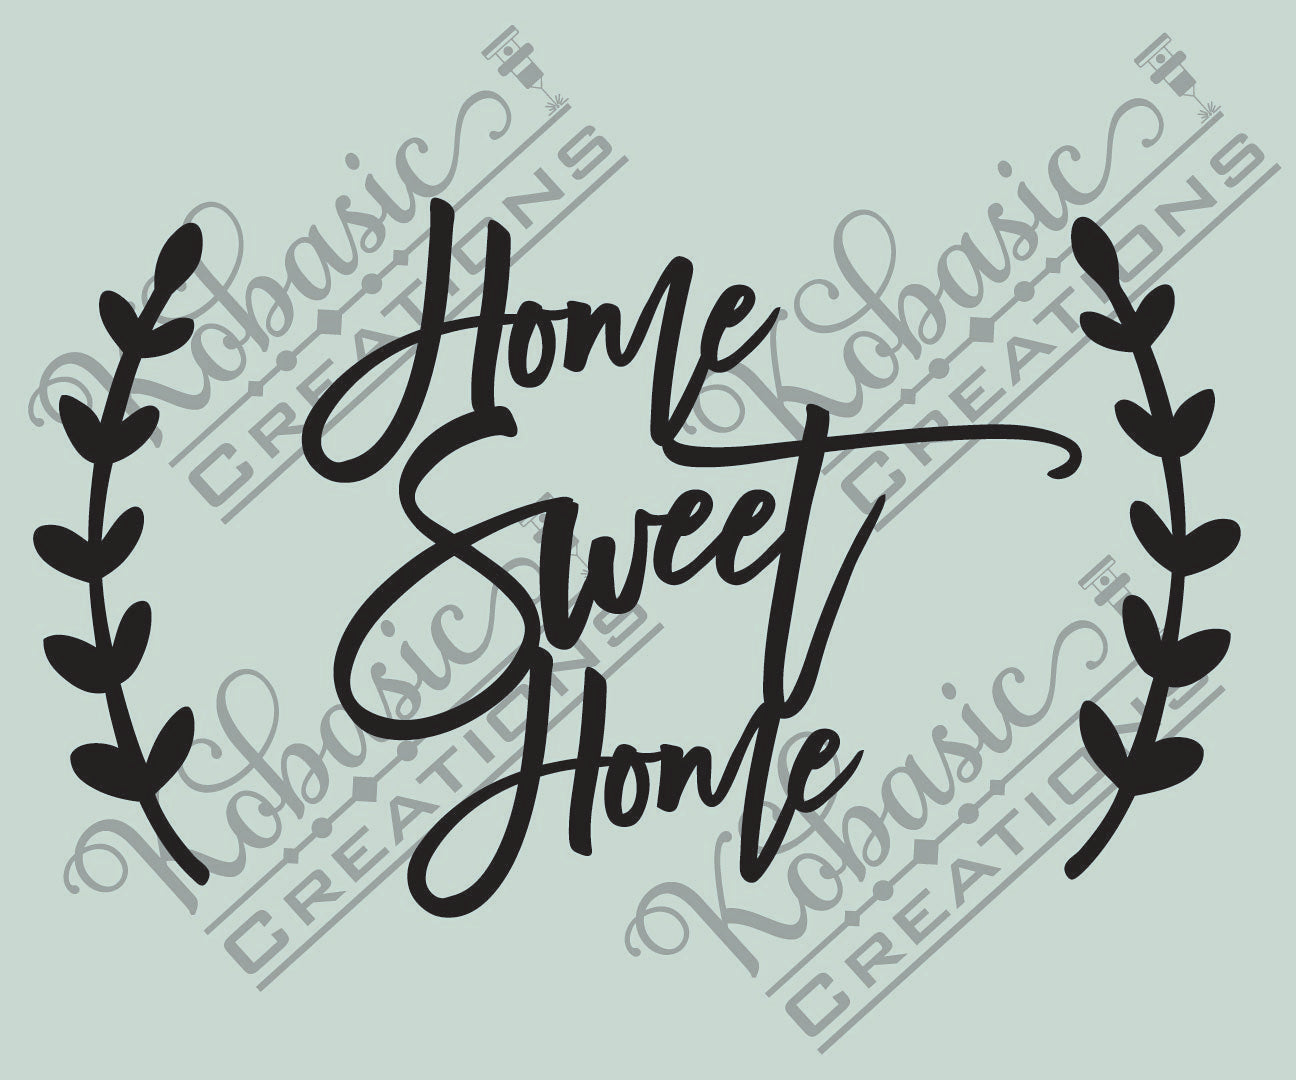 Home Sweet Home cut out file, digital download for laser cutting, vinyl cutting, cnc router cutting